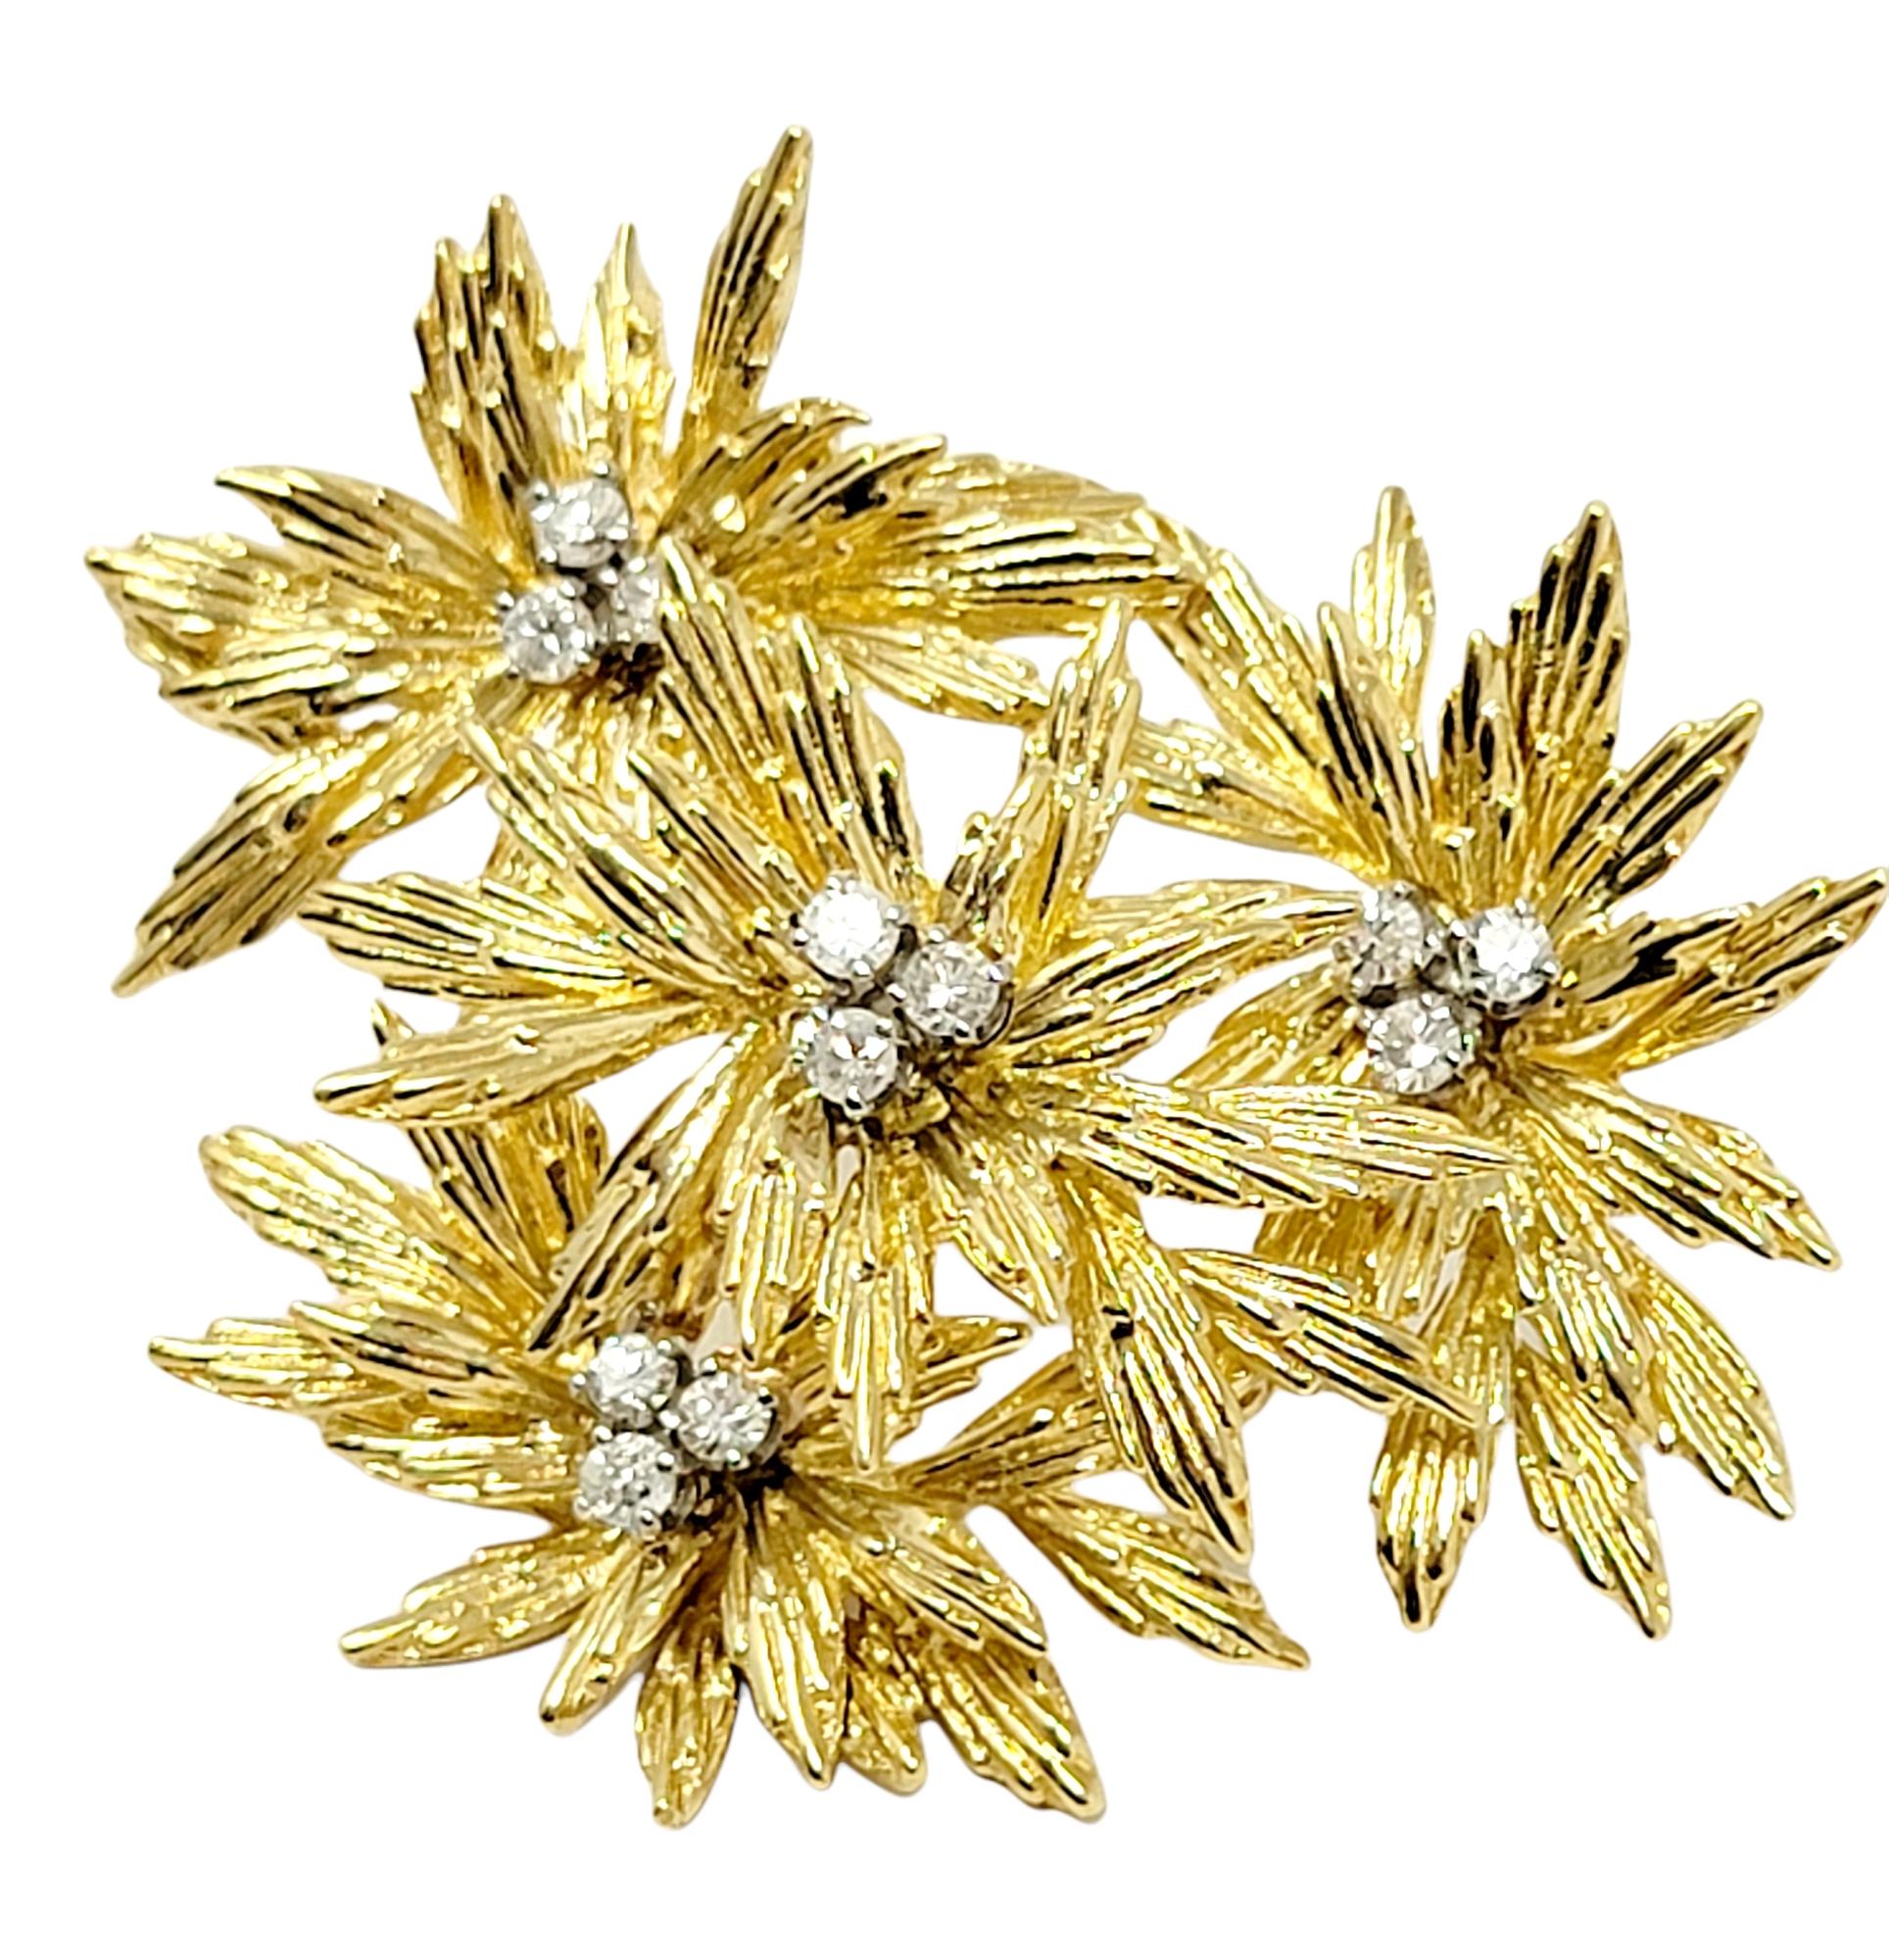 Absolutely stunning diamond and 18 karat yellow gold flower motif brooch. This beautifully detailed piece is accented by incredible sparkling diamonds that shimmer throughout. The exquisite brooch features multiple layers of textured gold petals,